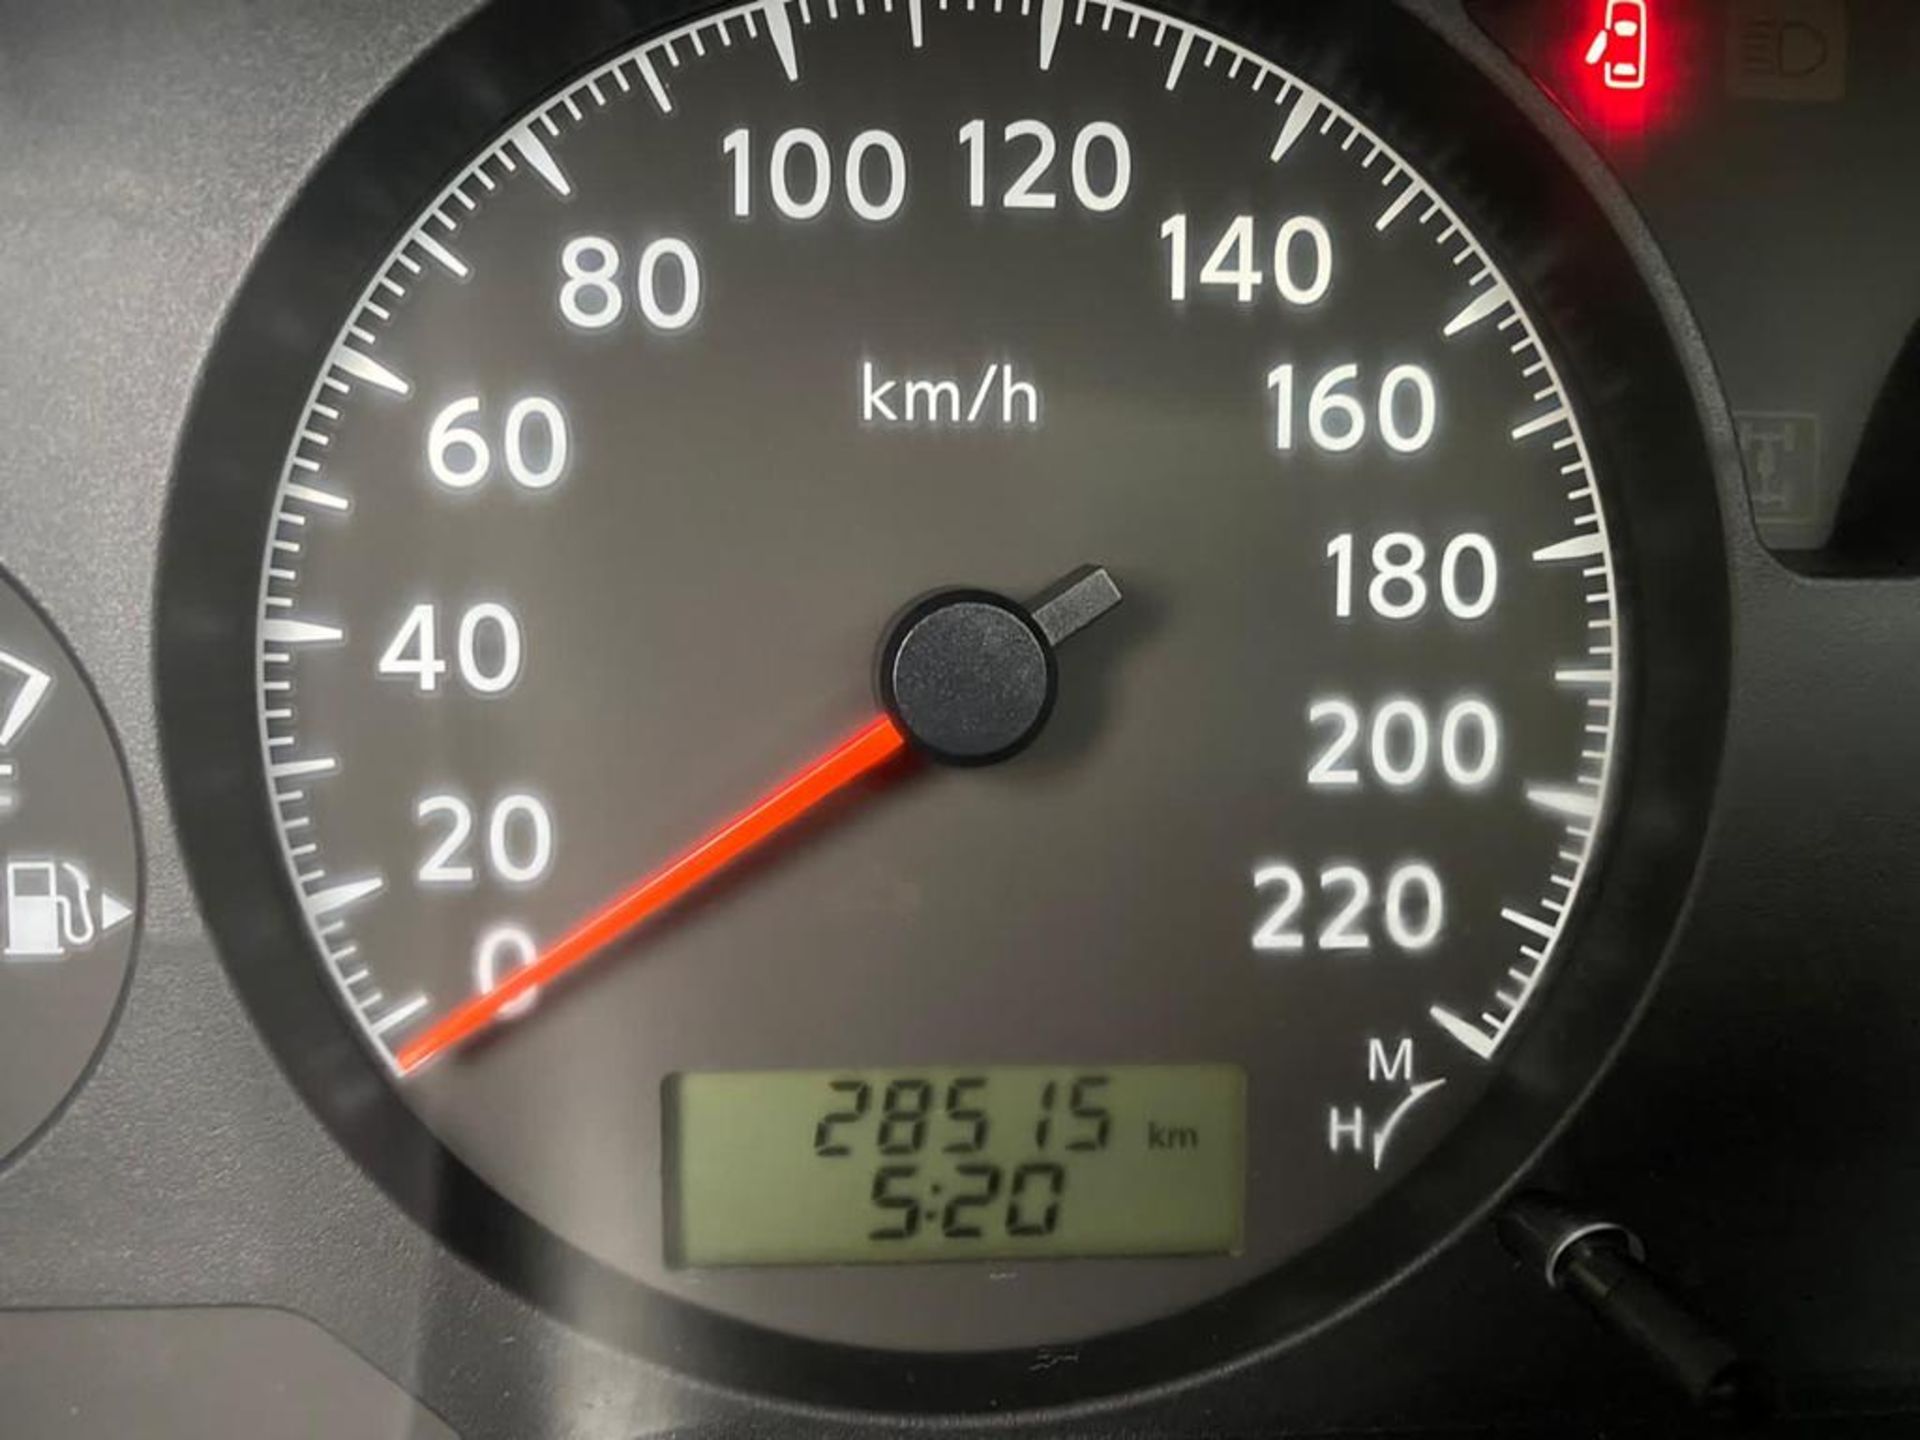 NISSAN PATROL VTC 4800 4.8 LITRE V6 2018 2DR LHD, LEFT IN MAY 2019, 28,000 KM, SHIPPED FROM QATAR - Image 10 of 15